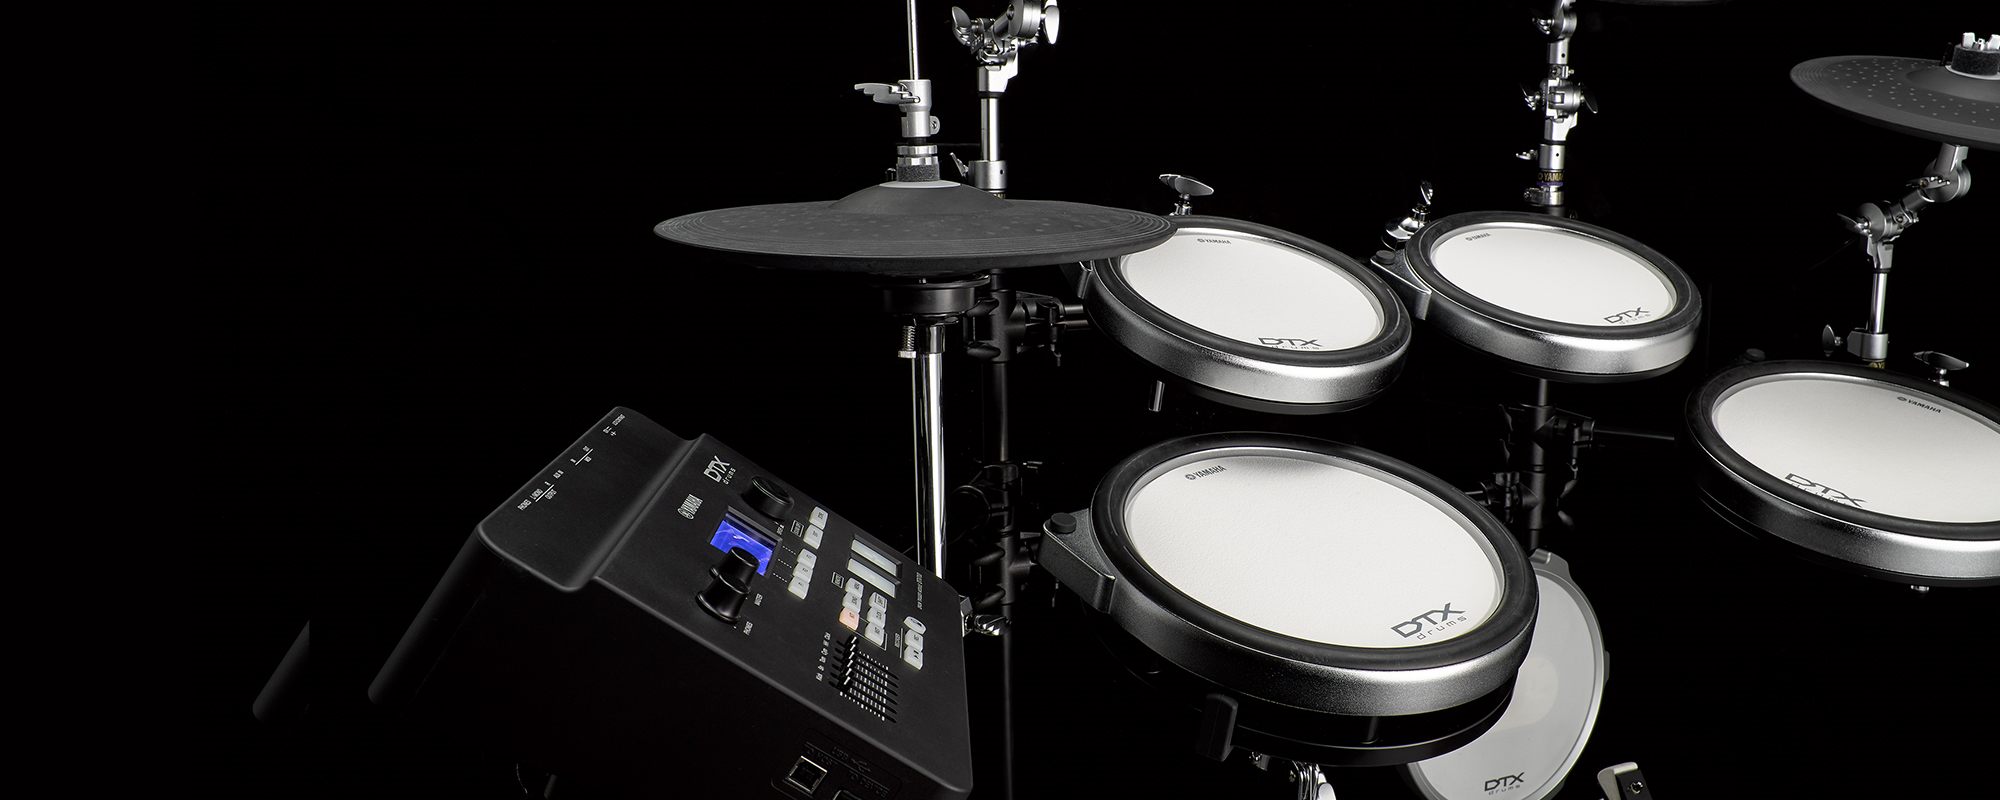 DTX700 Series - Overview - Electronic Drum Kits - DTX Electronic 